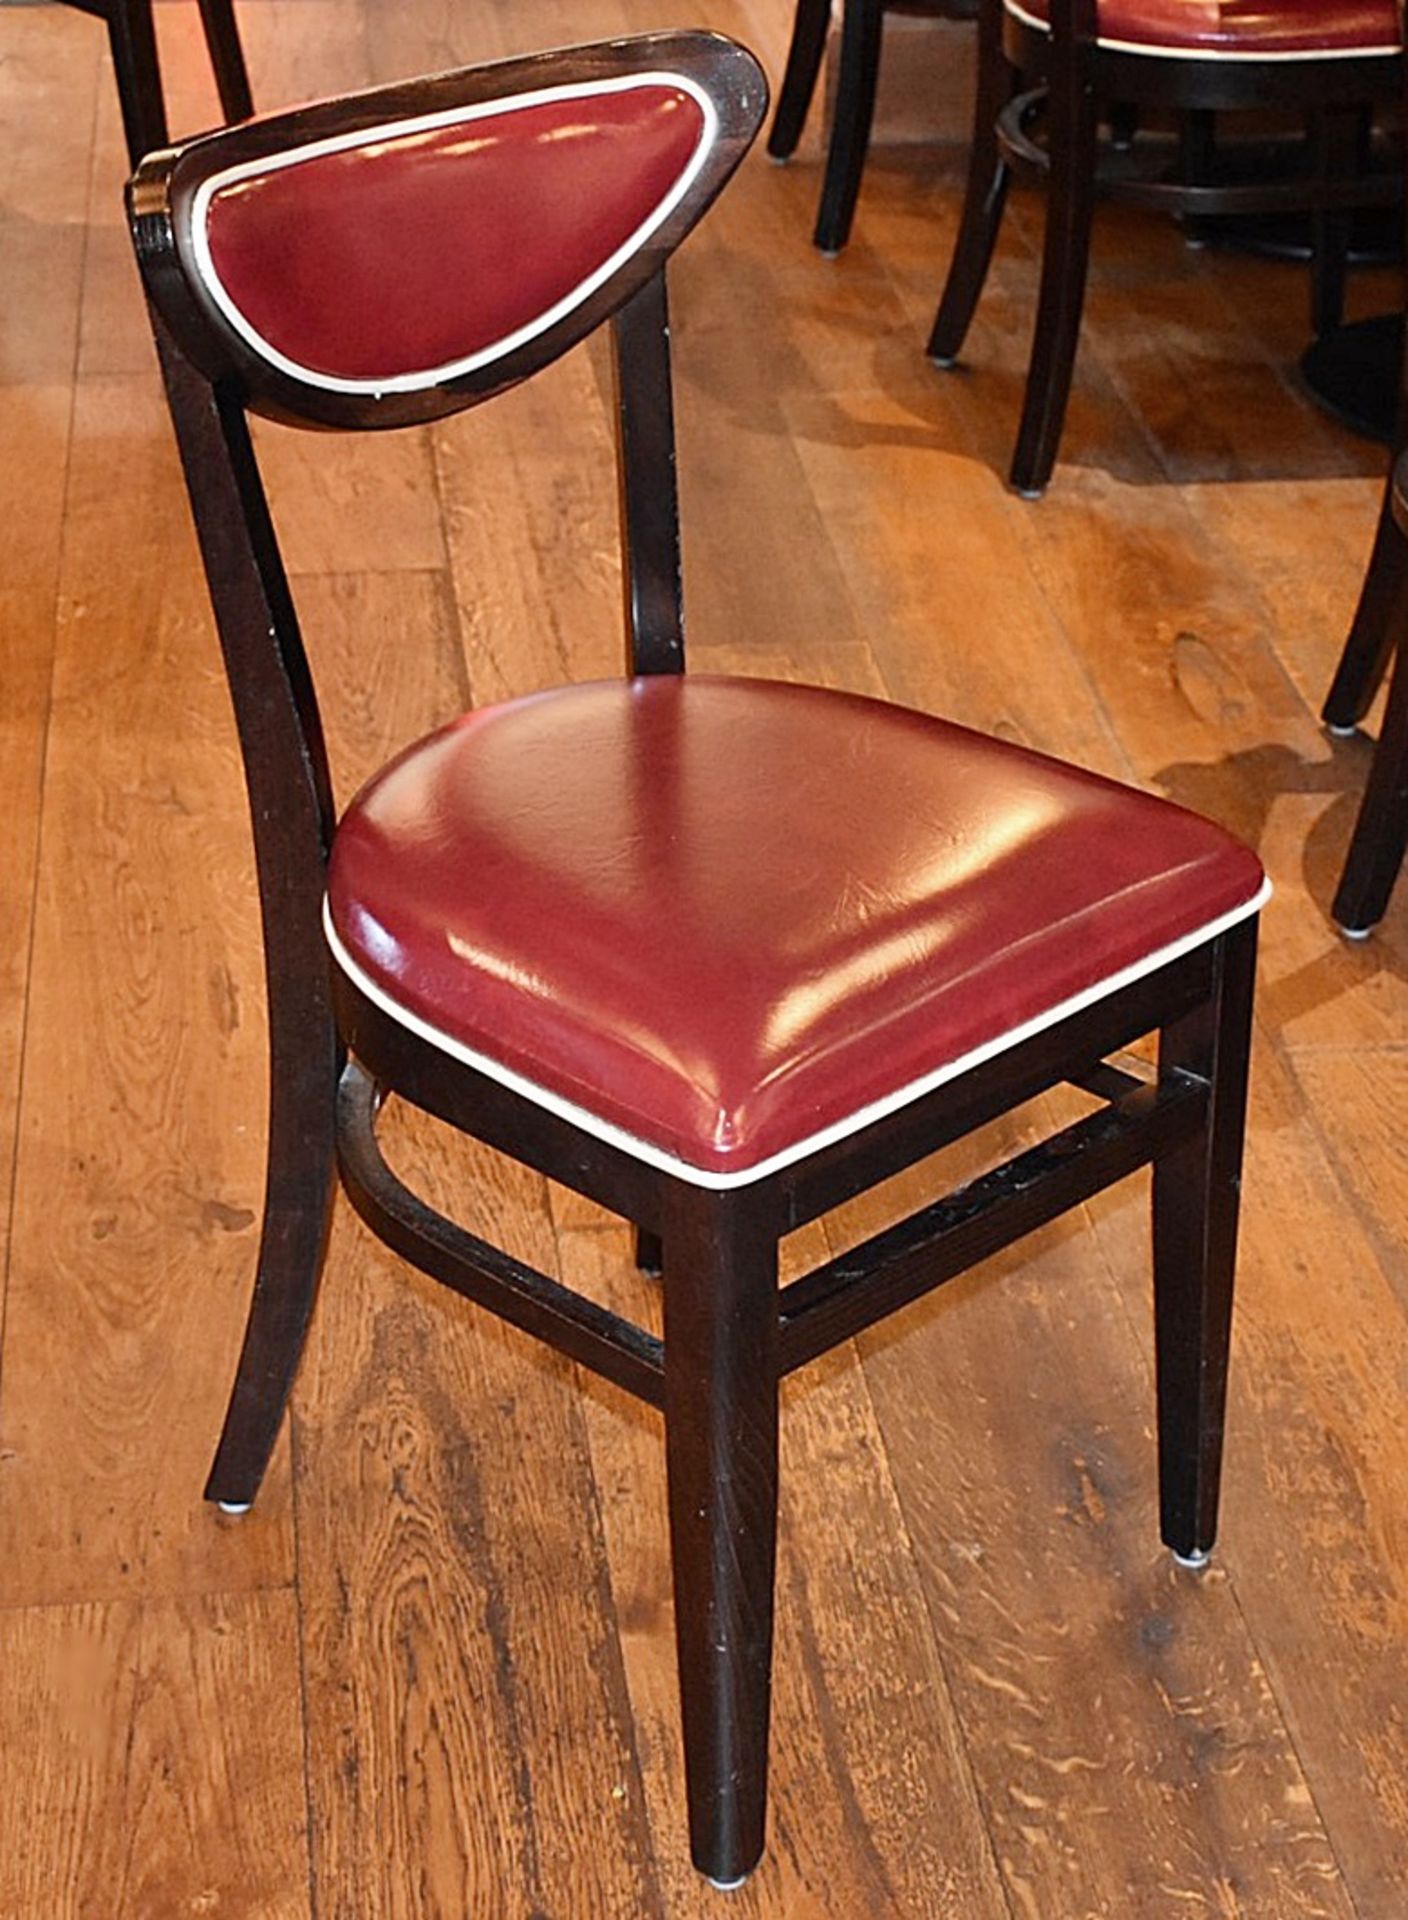 8 x Wine Red Faux Leather Dining Chairs From Italian American Restaurant - Retro Design With Dark